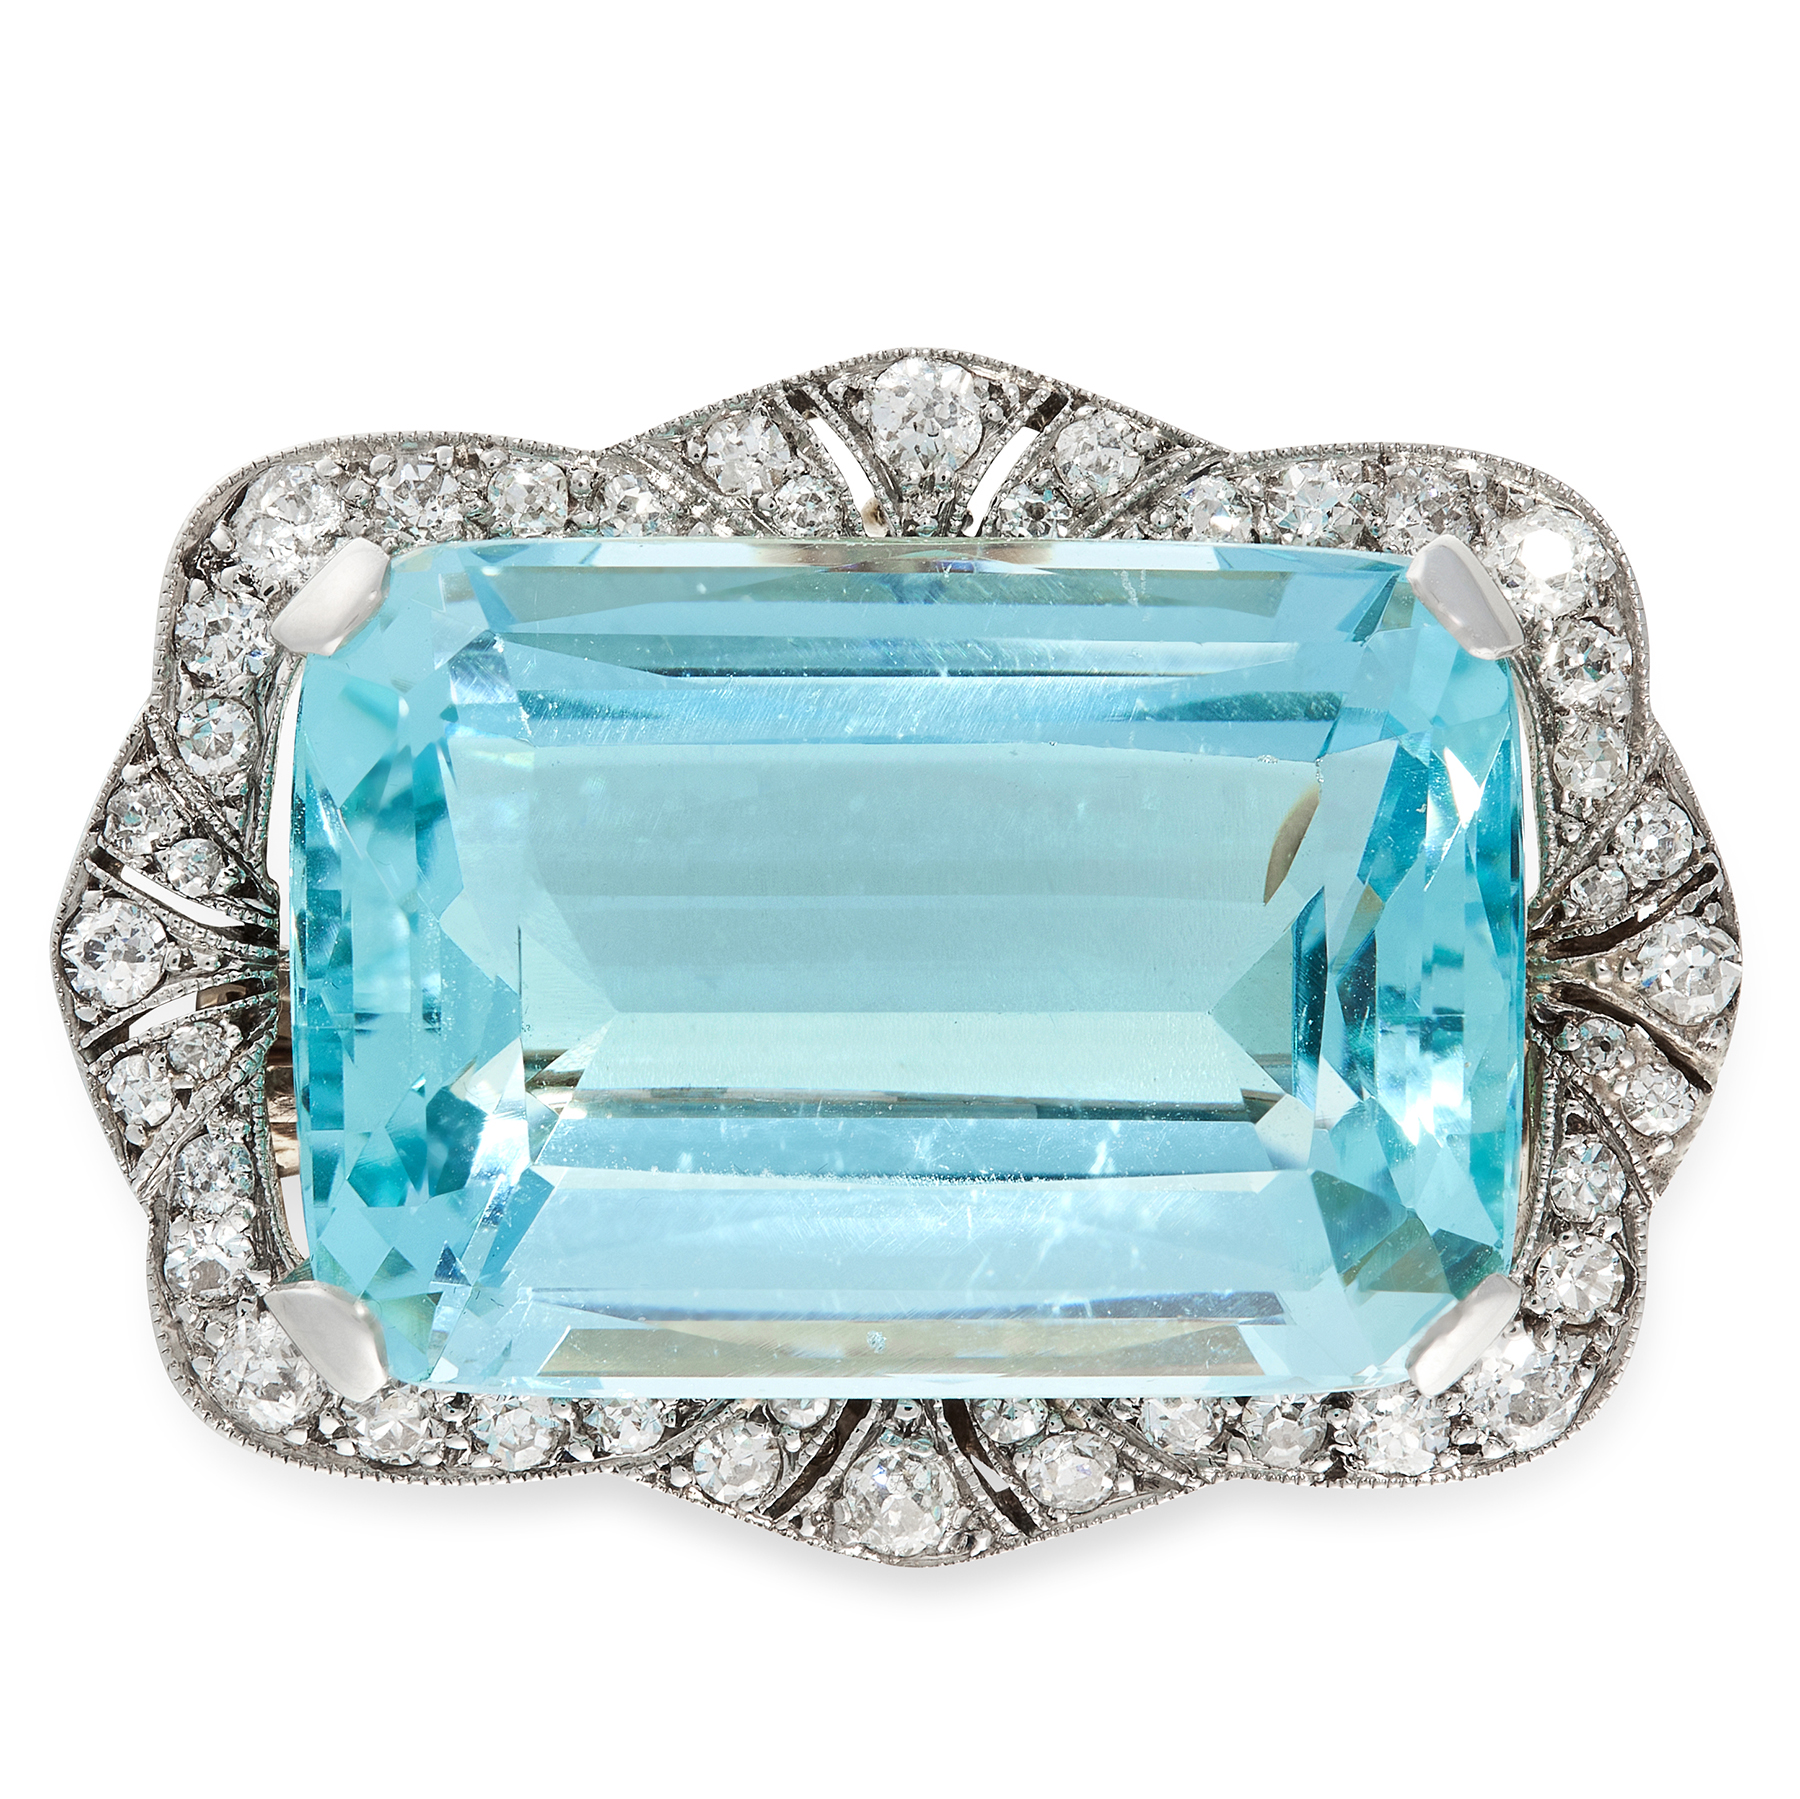 AN ART DECO AQUAMARINE AND DIAMOND PENDANT / BROOCH in yellow gold and platinum, set with a